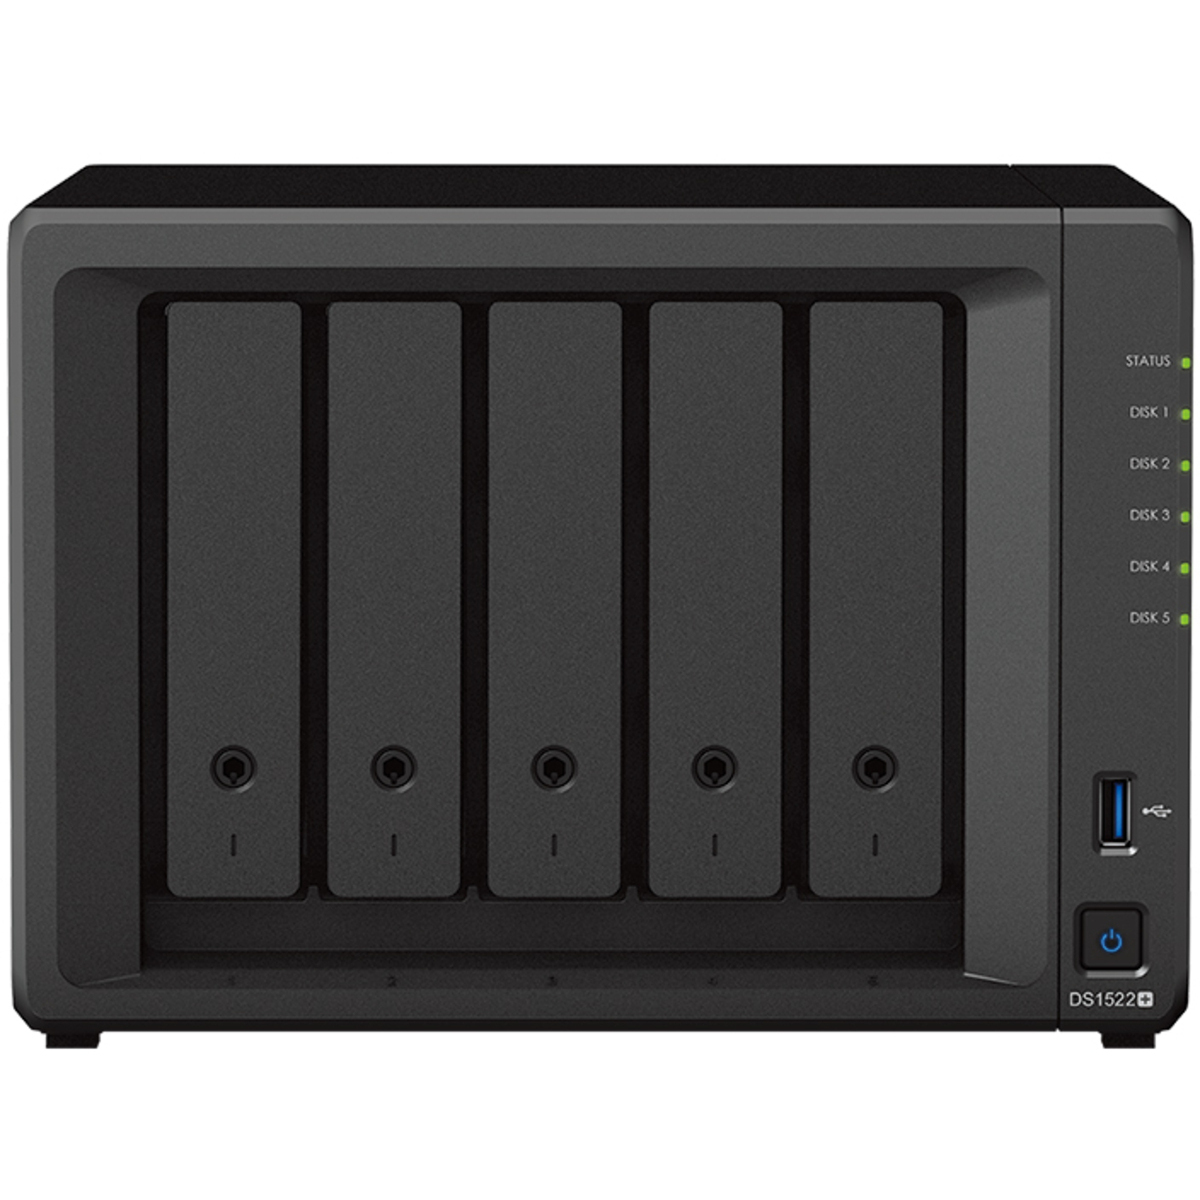 Synology DiskStation DS1522+ 56tb 5-Bay Desktop Multimedia / Power User / Business NAS - Network Attached Storage Device 4x14tb Seagate IronWolf Pro ST14000NT001 3.5 7200rpm SATA 6Gb/s HDD NAS Class Drives Installed - Burn-In Tested - ON SALE DiskStation DS1522+